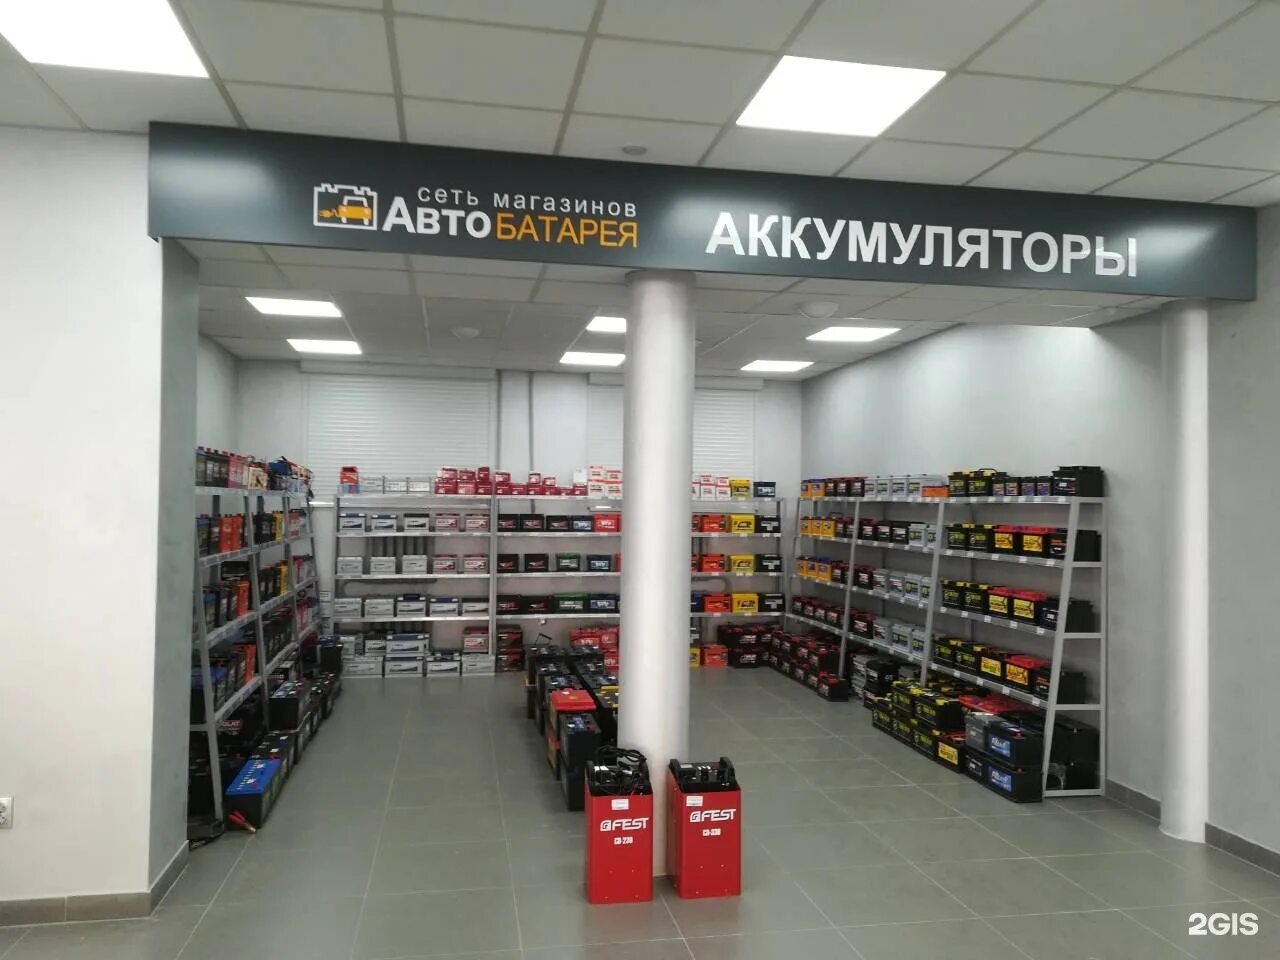 Battery store